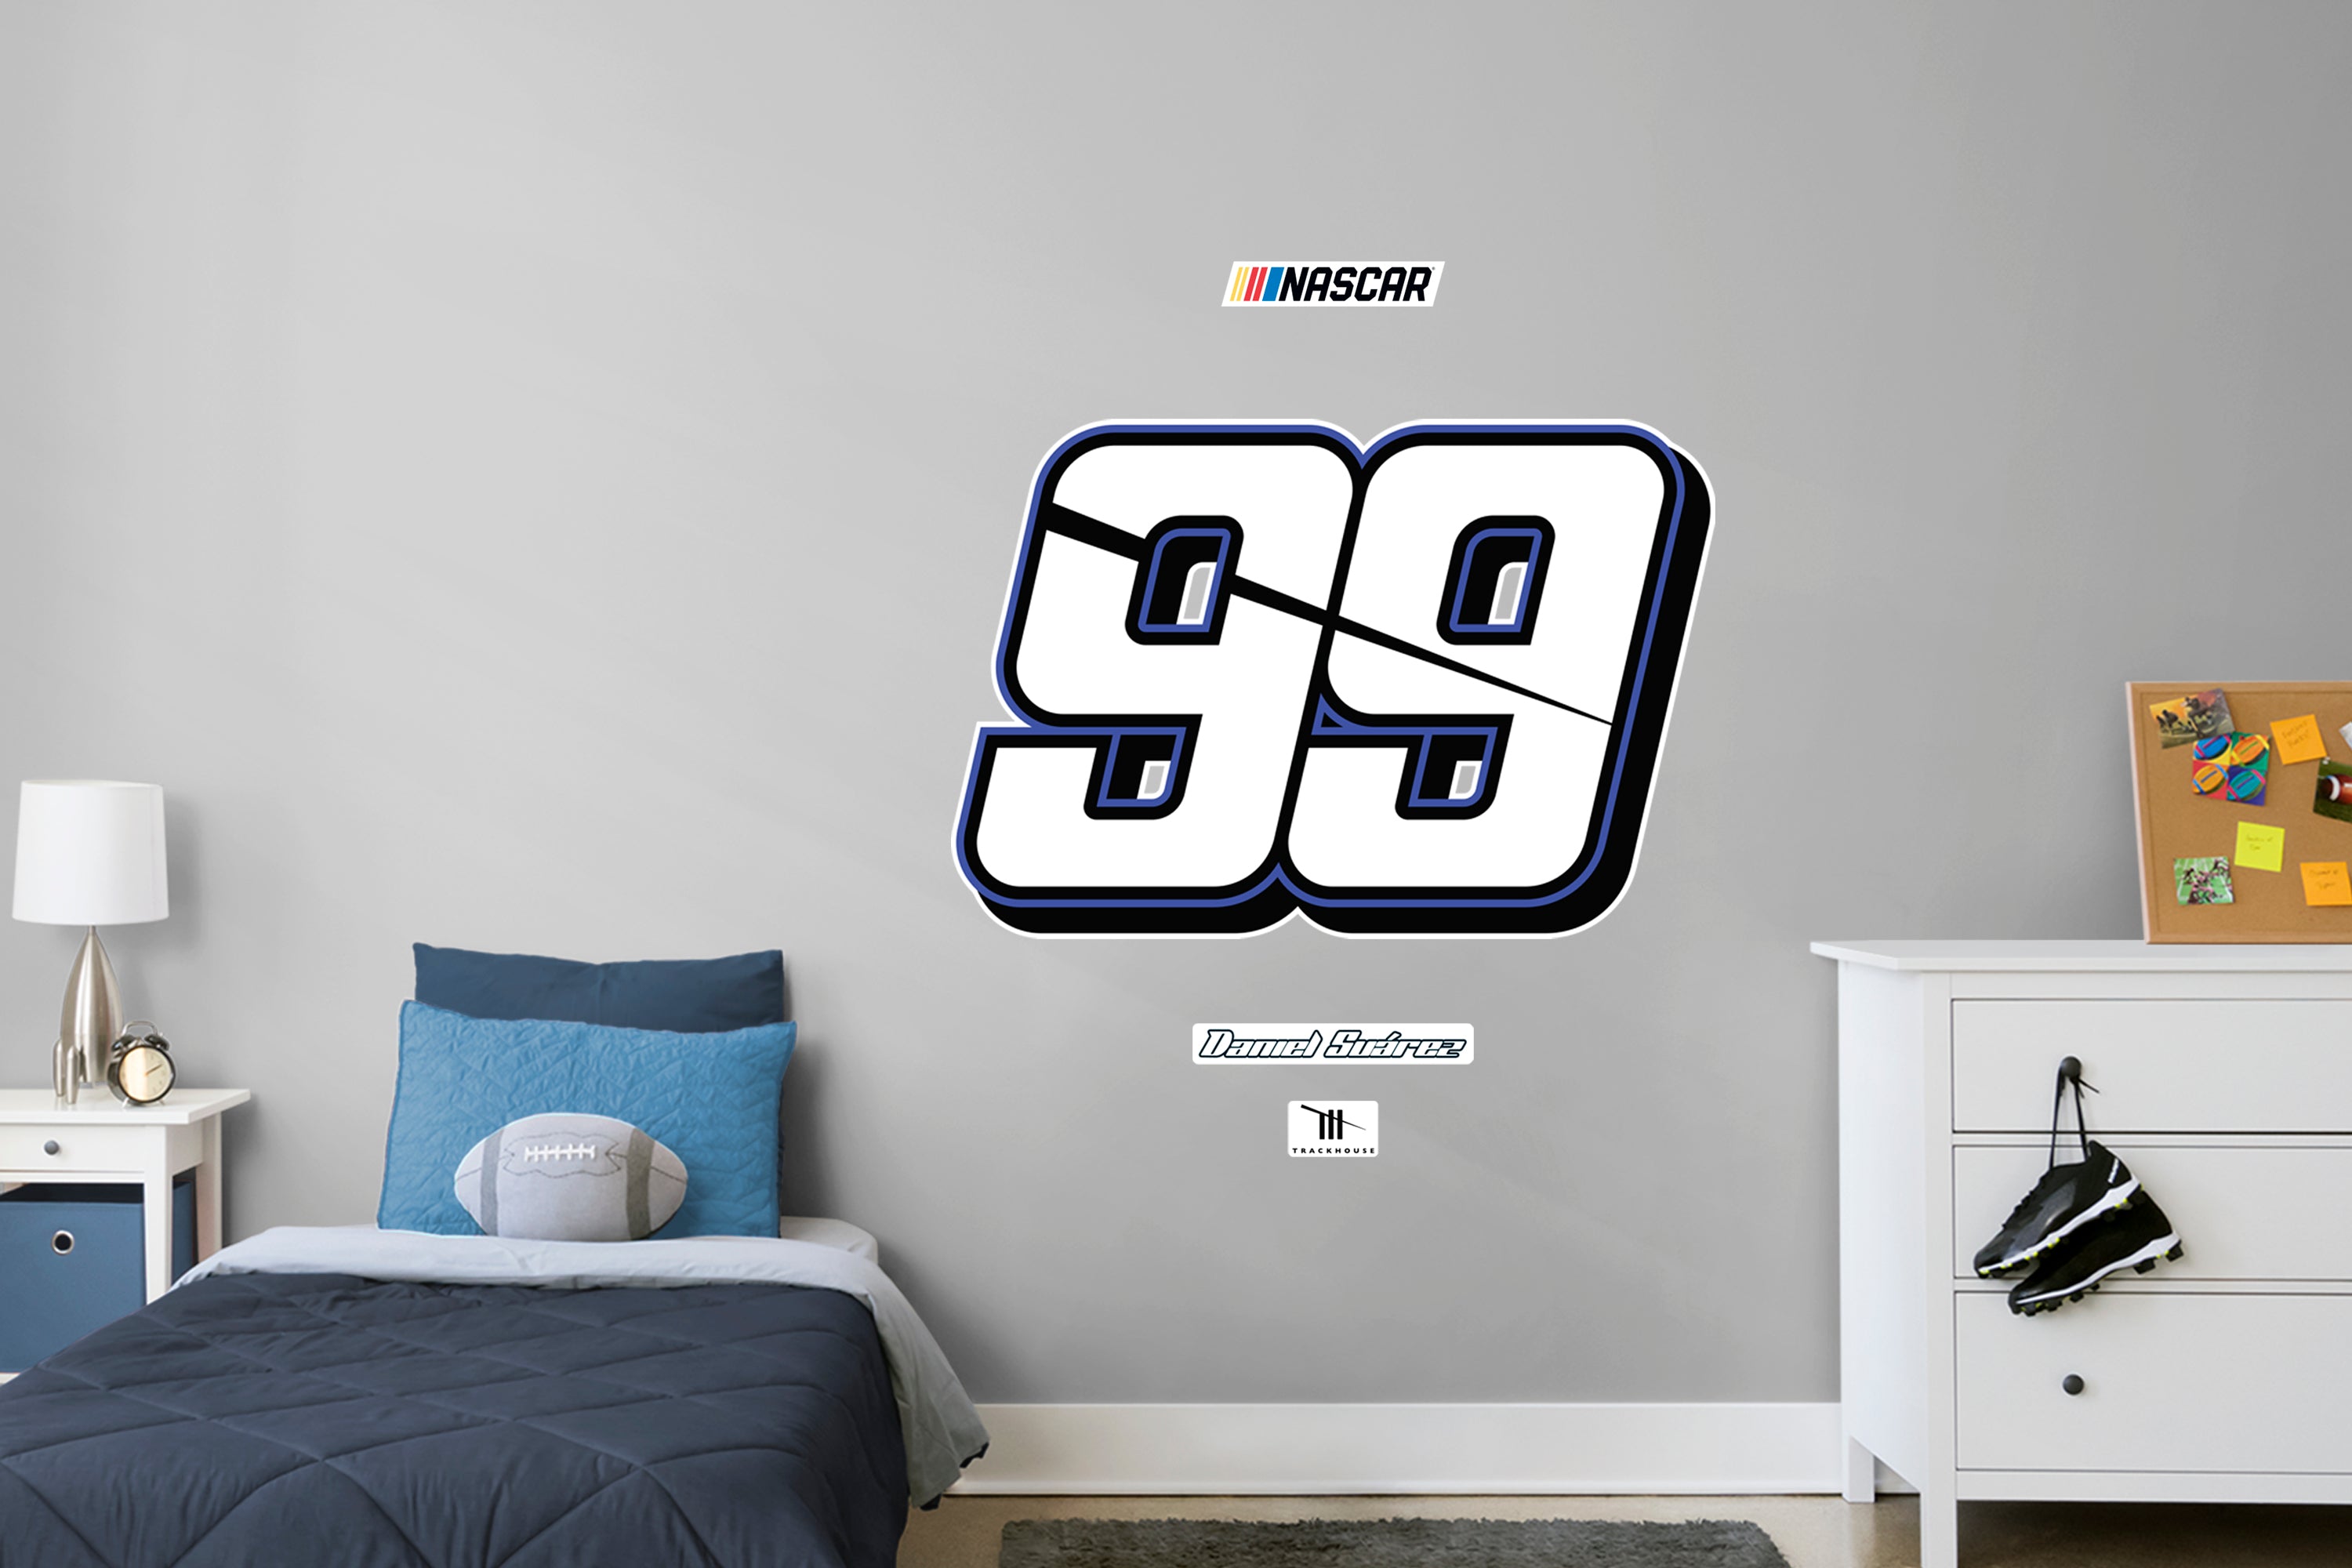 Daniel Suarez 2021 #99 Logo - Officially Licensed NASCAR Removable Wall Decal XL by Fathead | Vinyl